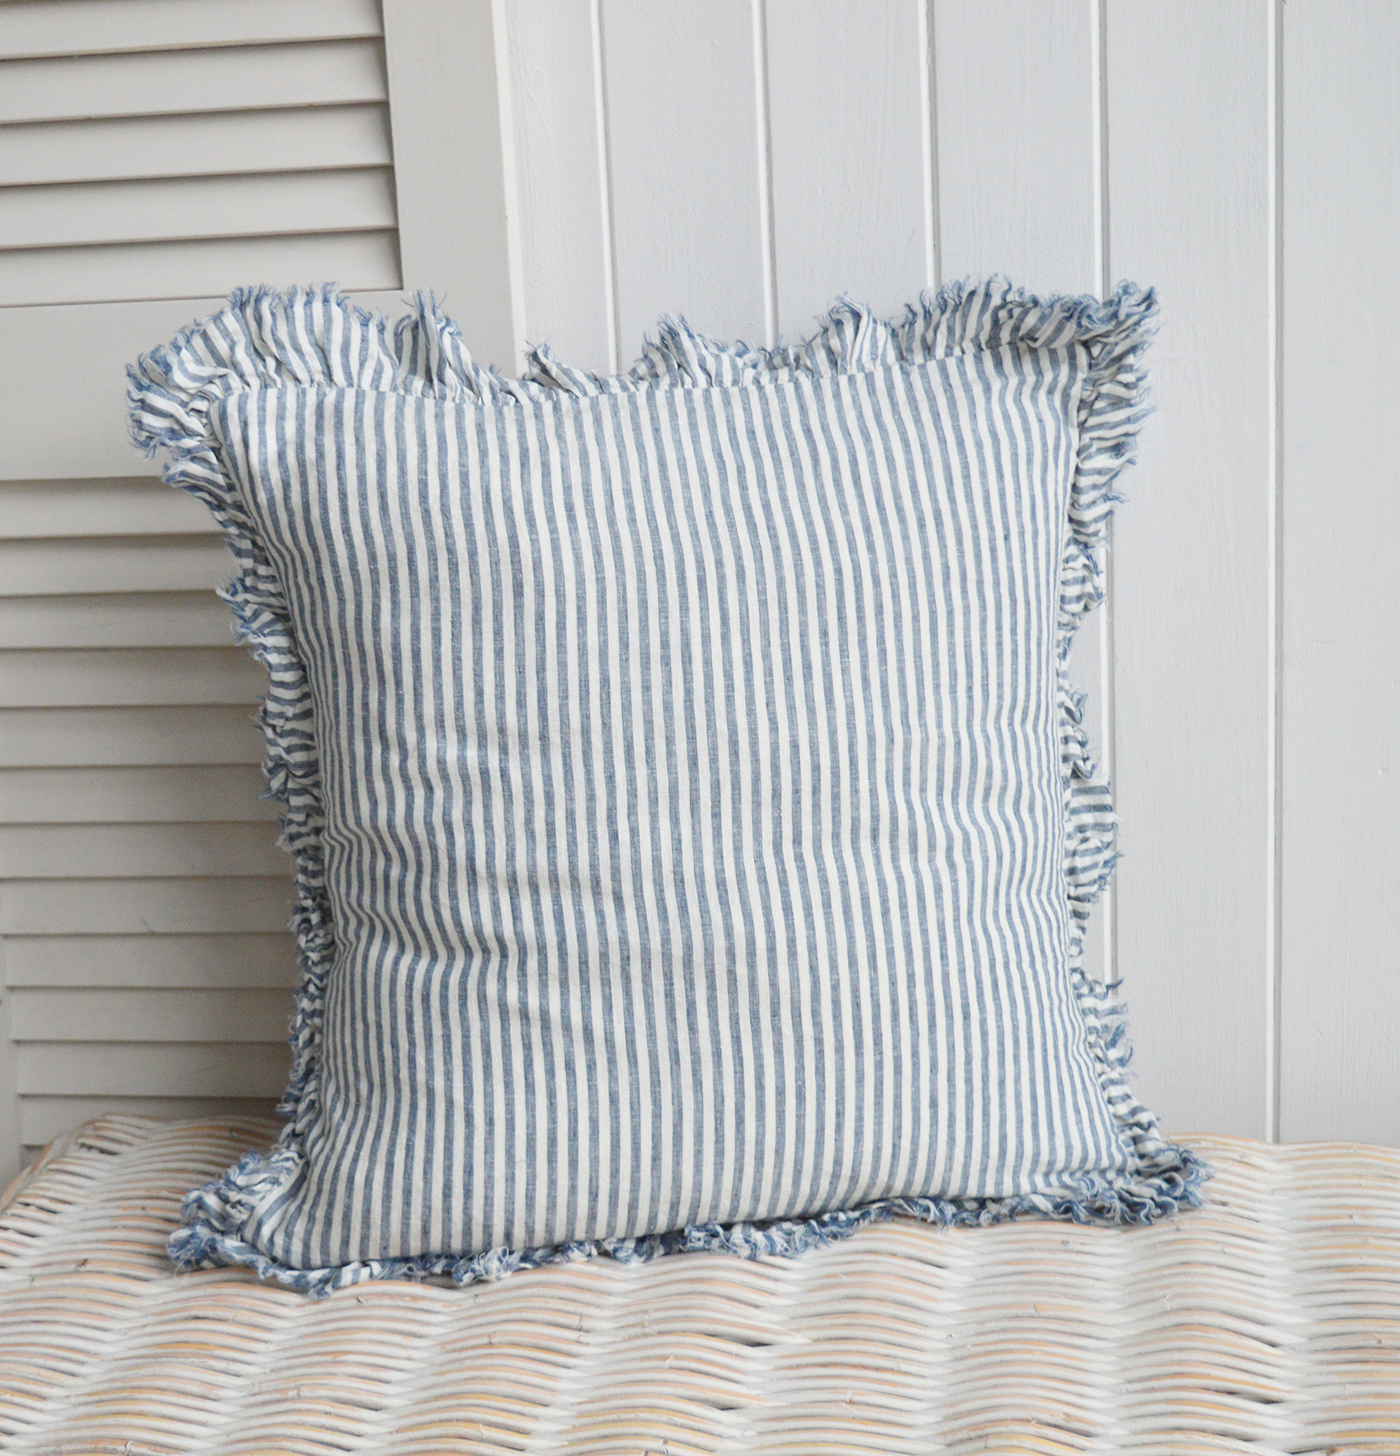 Navy and white pin stripe linen cushion cover